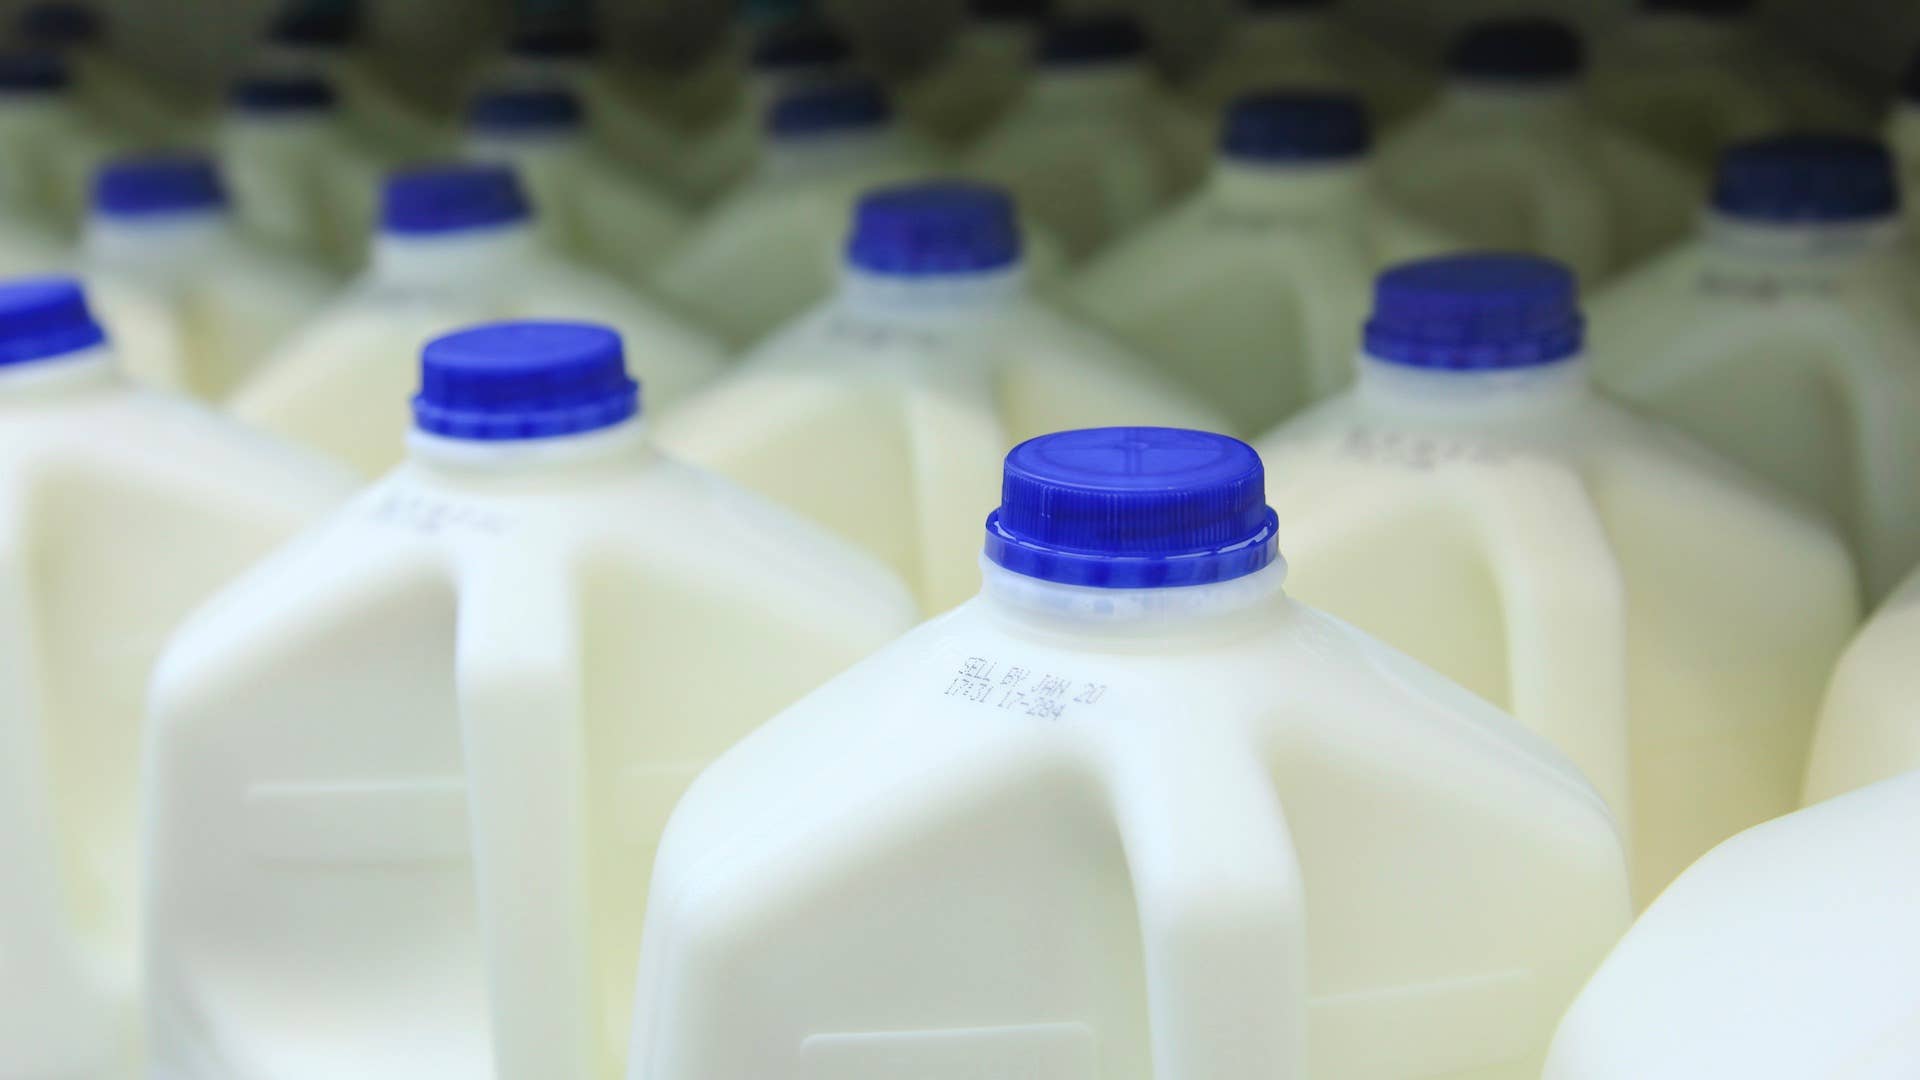 Twitter users react to Texas mom's milk budget